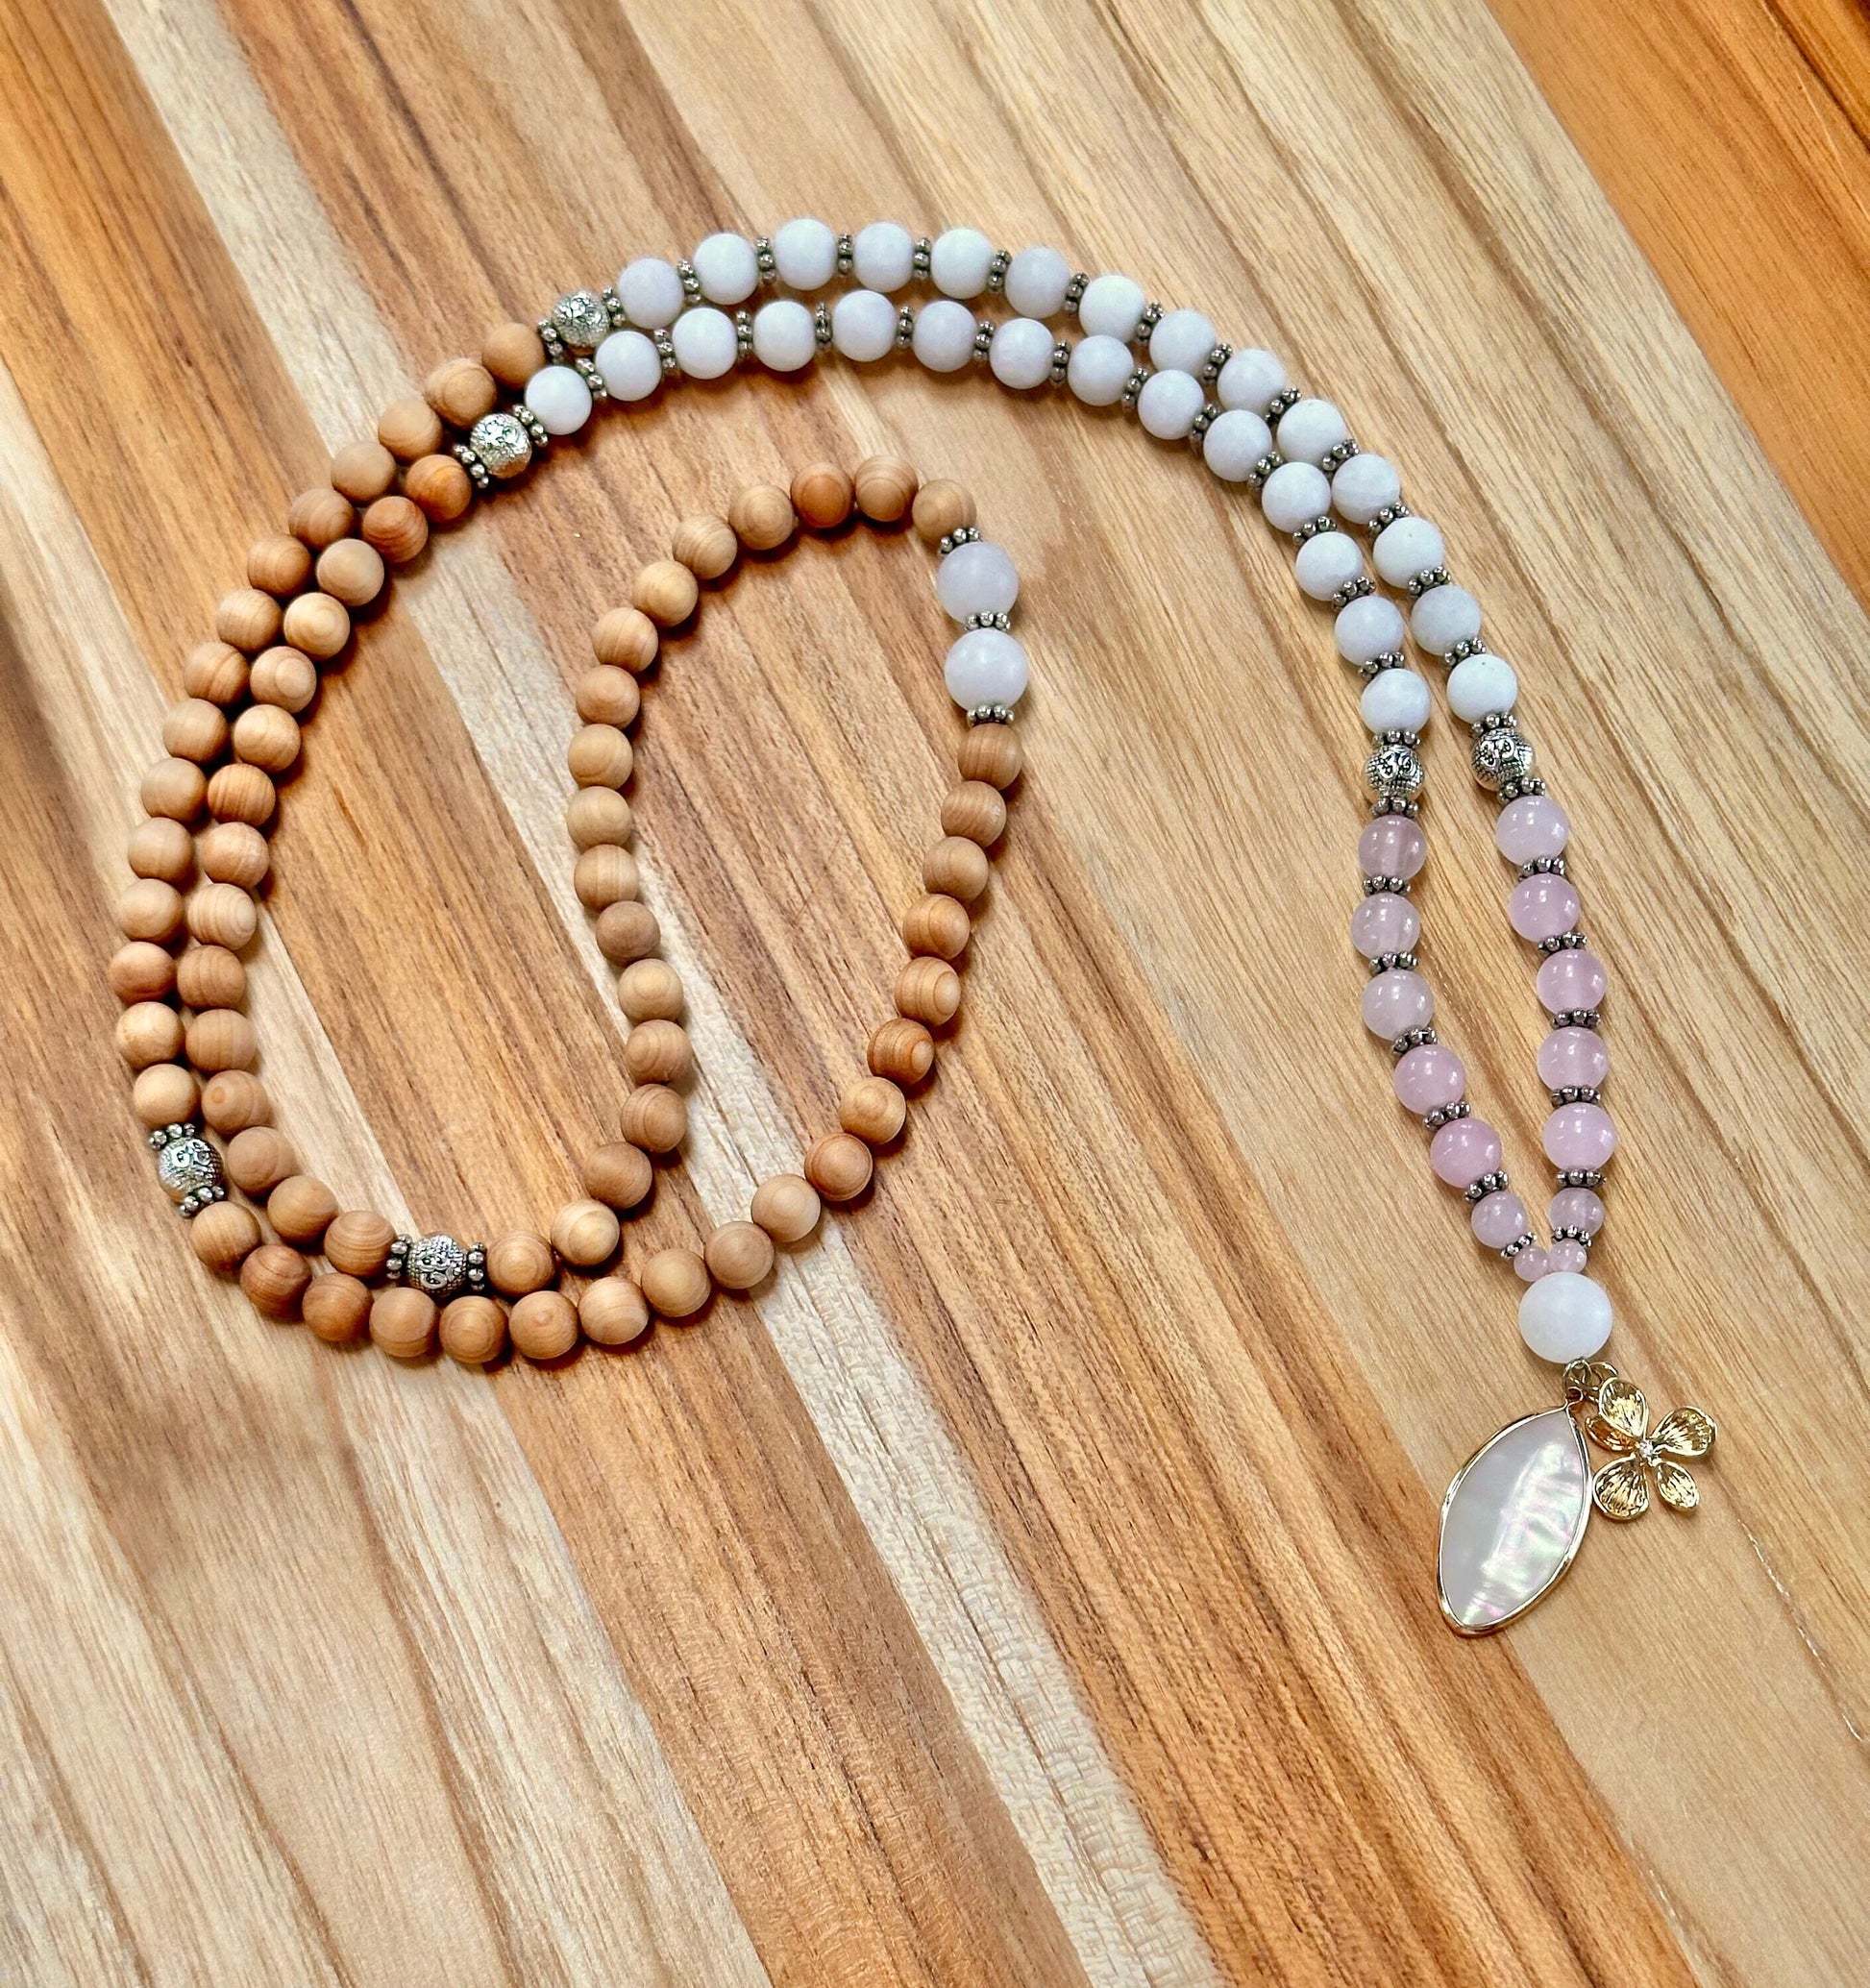 108 bead mala necklace mediation yoga practice jewelry made with white jade pink rose quartz alabaster and thuja wood. Perfect gift for her, gift for yoga lovers